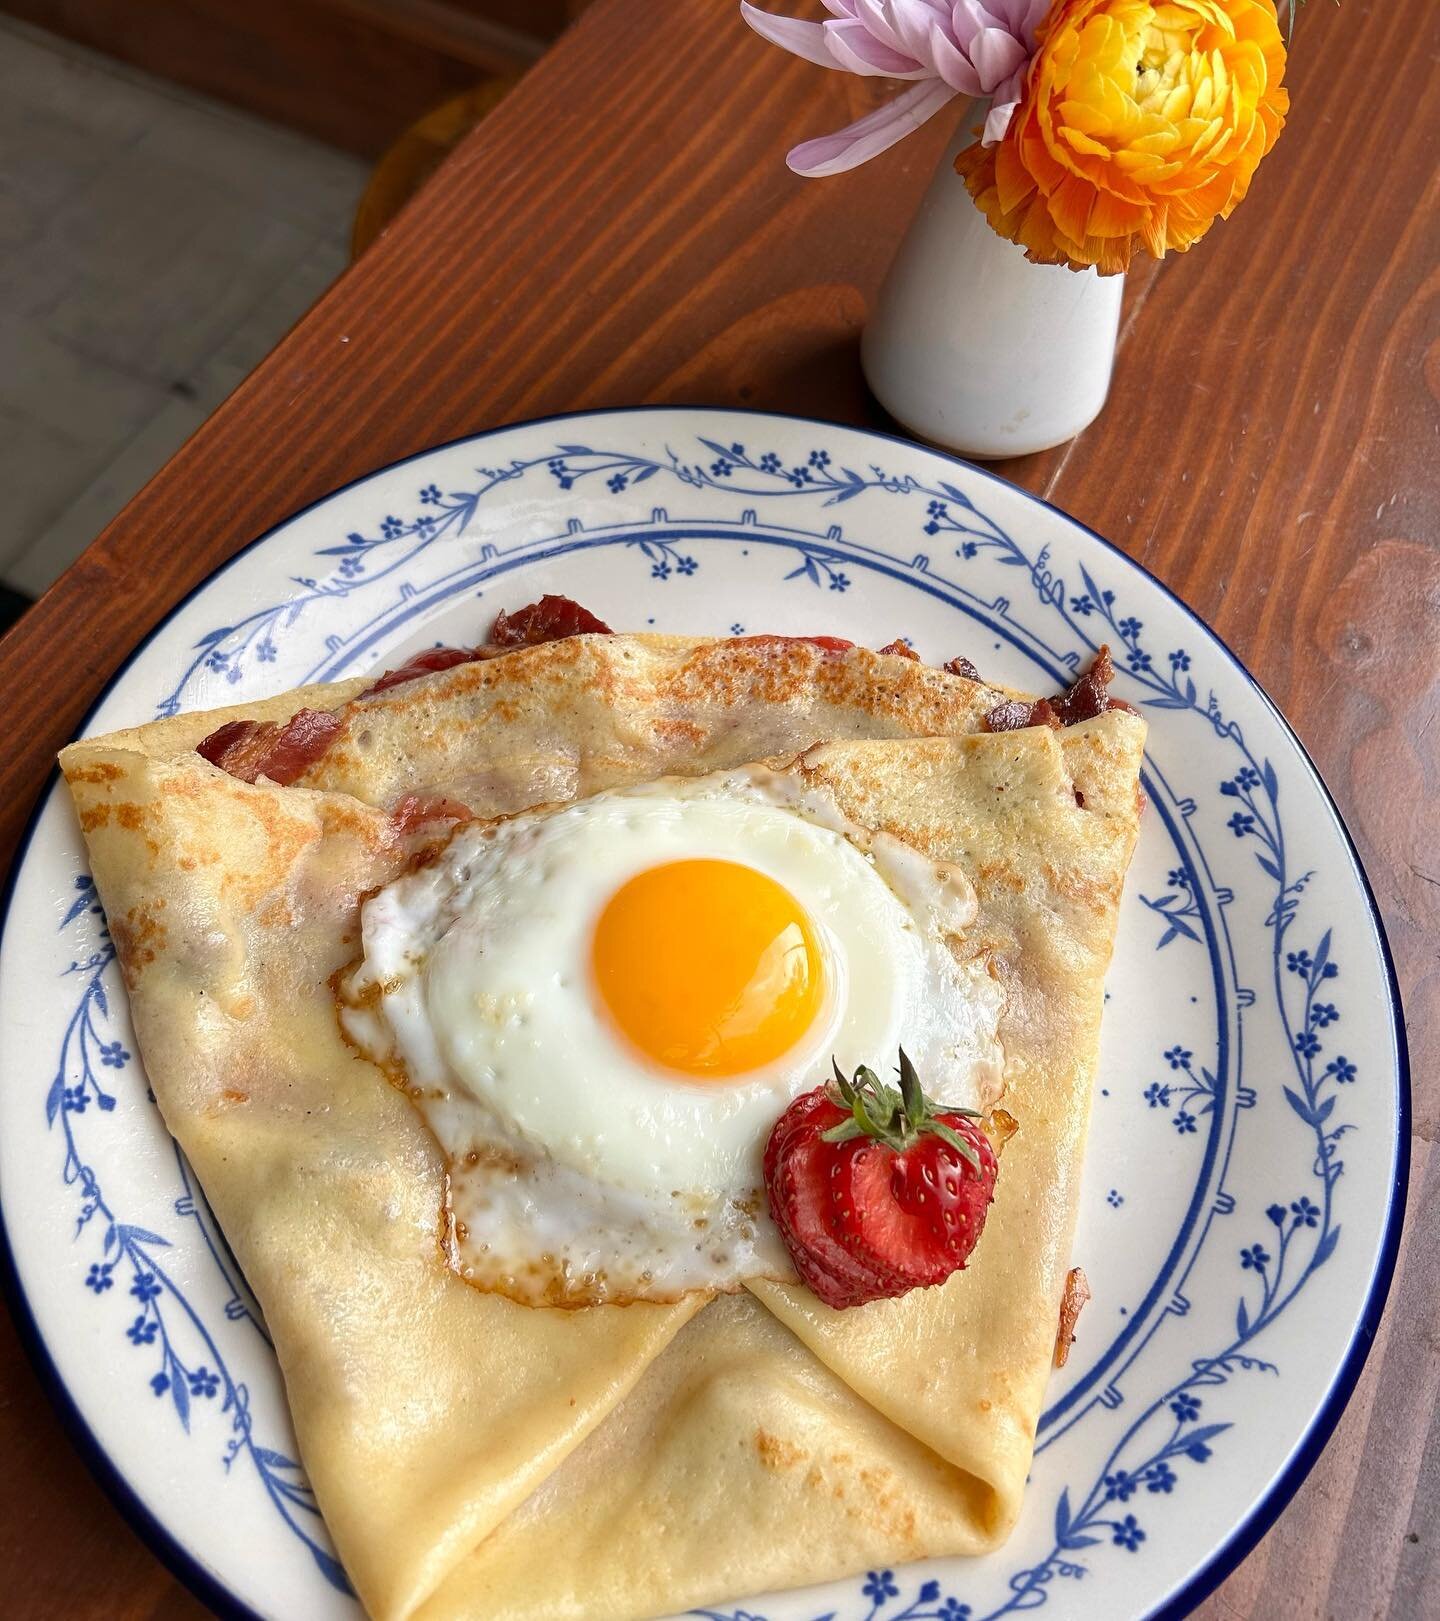 The Goodfellas. Fan favorite, best seller, all around good guy. Bacon and sharp cheddar drizzled with fresh strawberry preserves, topped with a sunny side up  @barham_family_farm fresh egg and the cutest strawberry. Give this savory and sweet classic